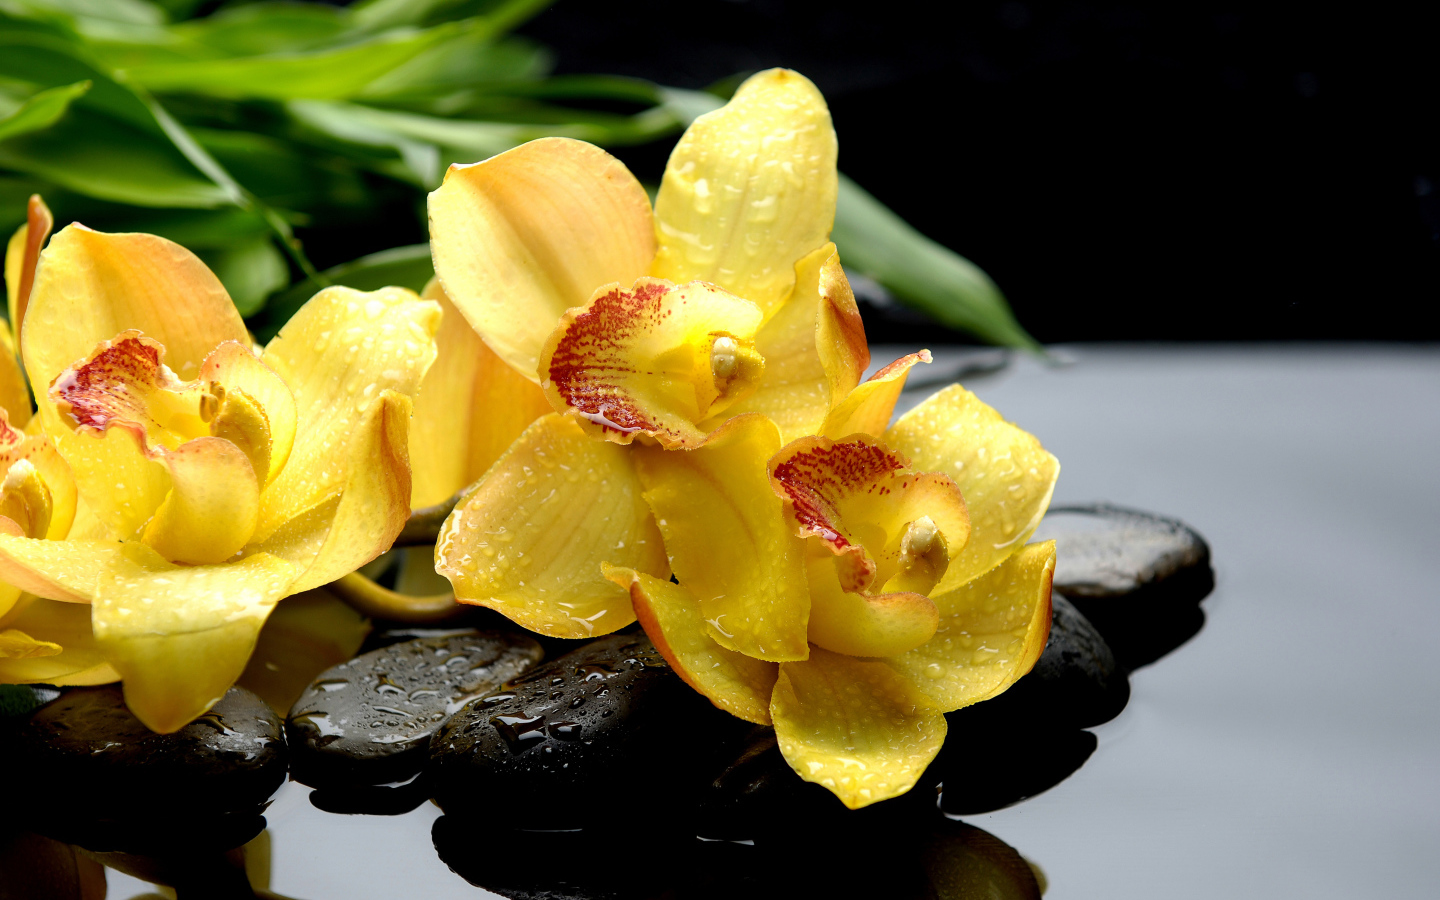 Yellow orchid flowers lie on a stone in the water